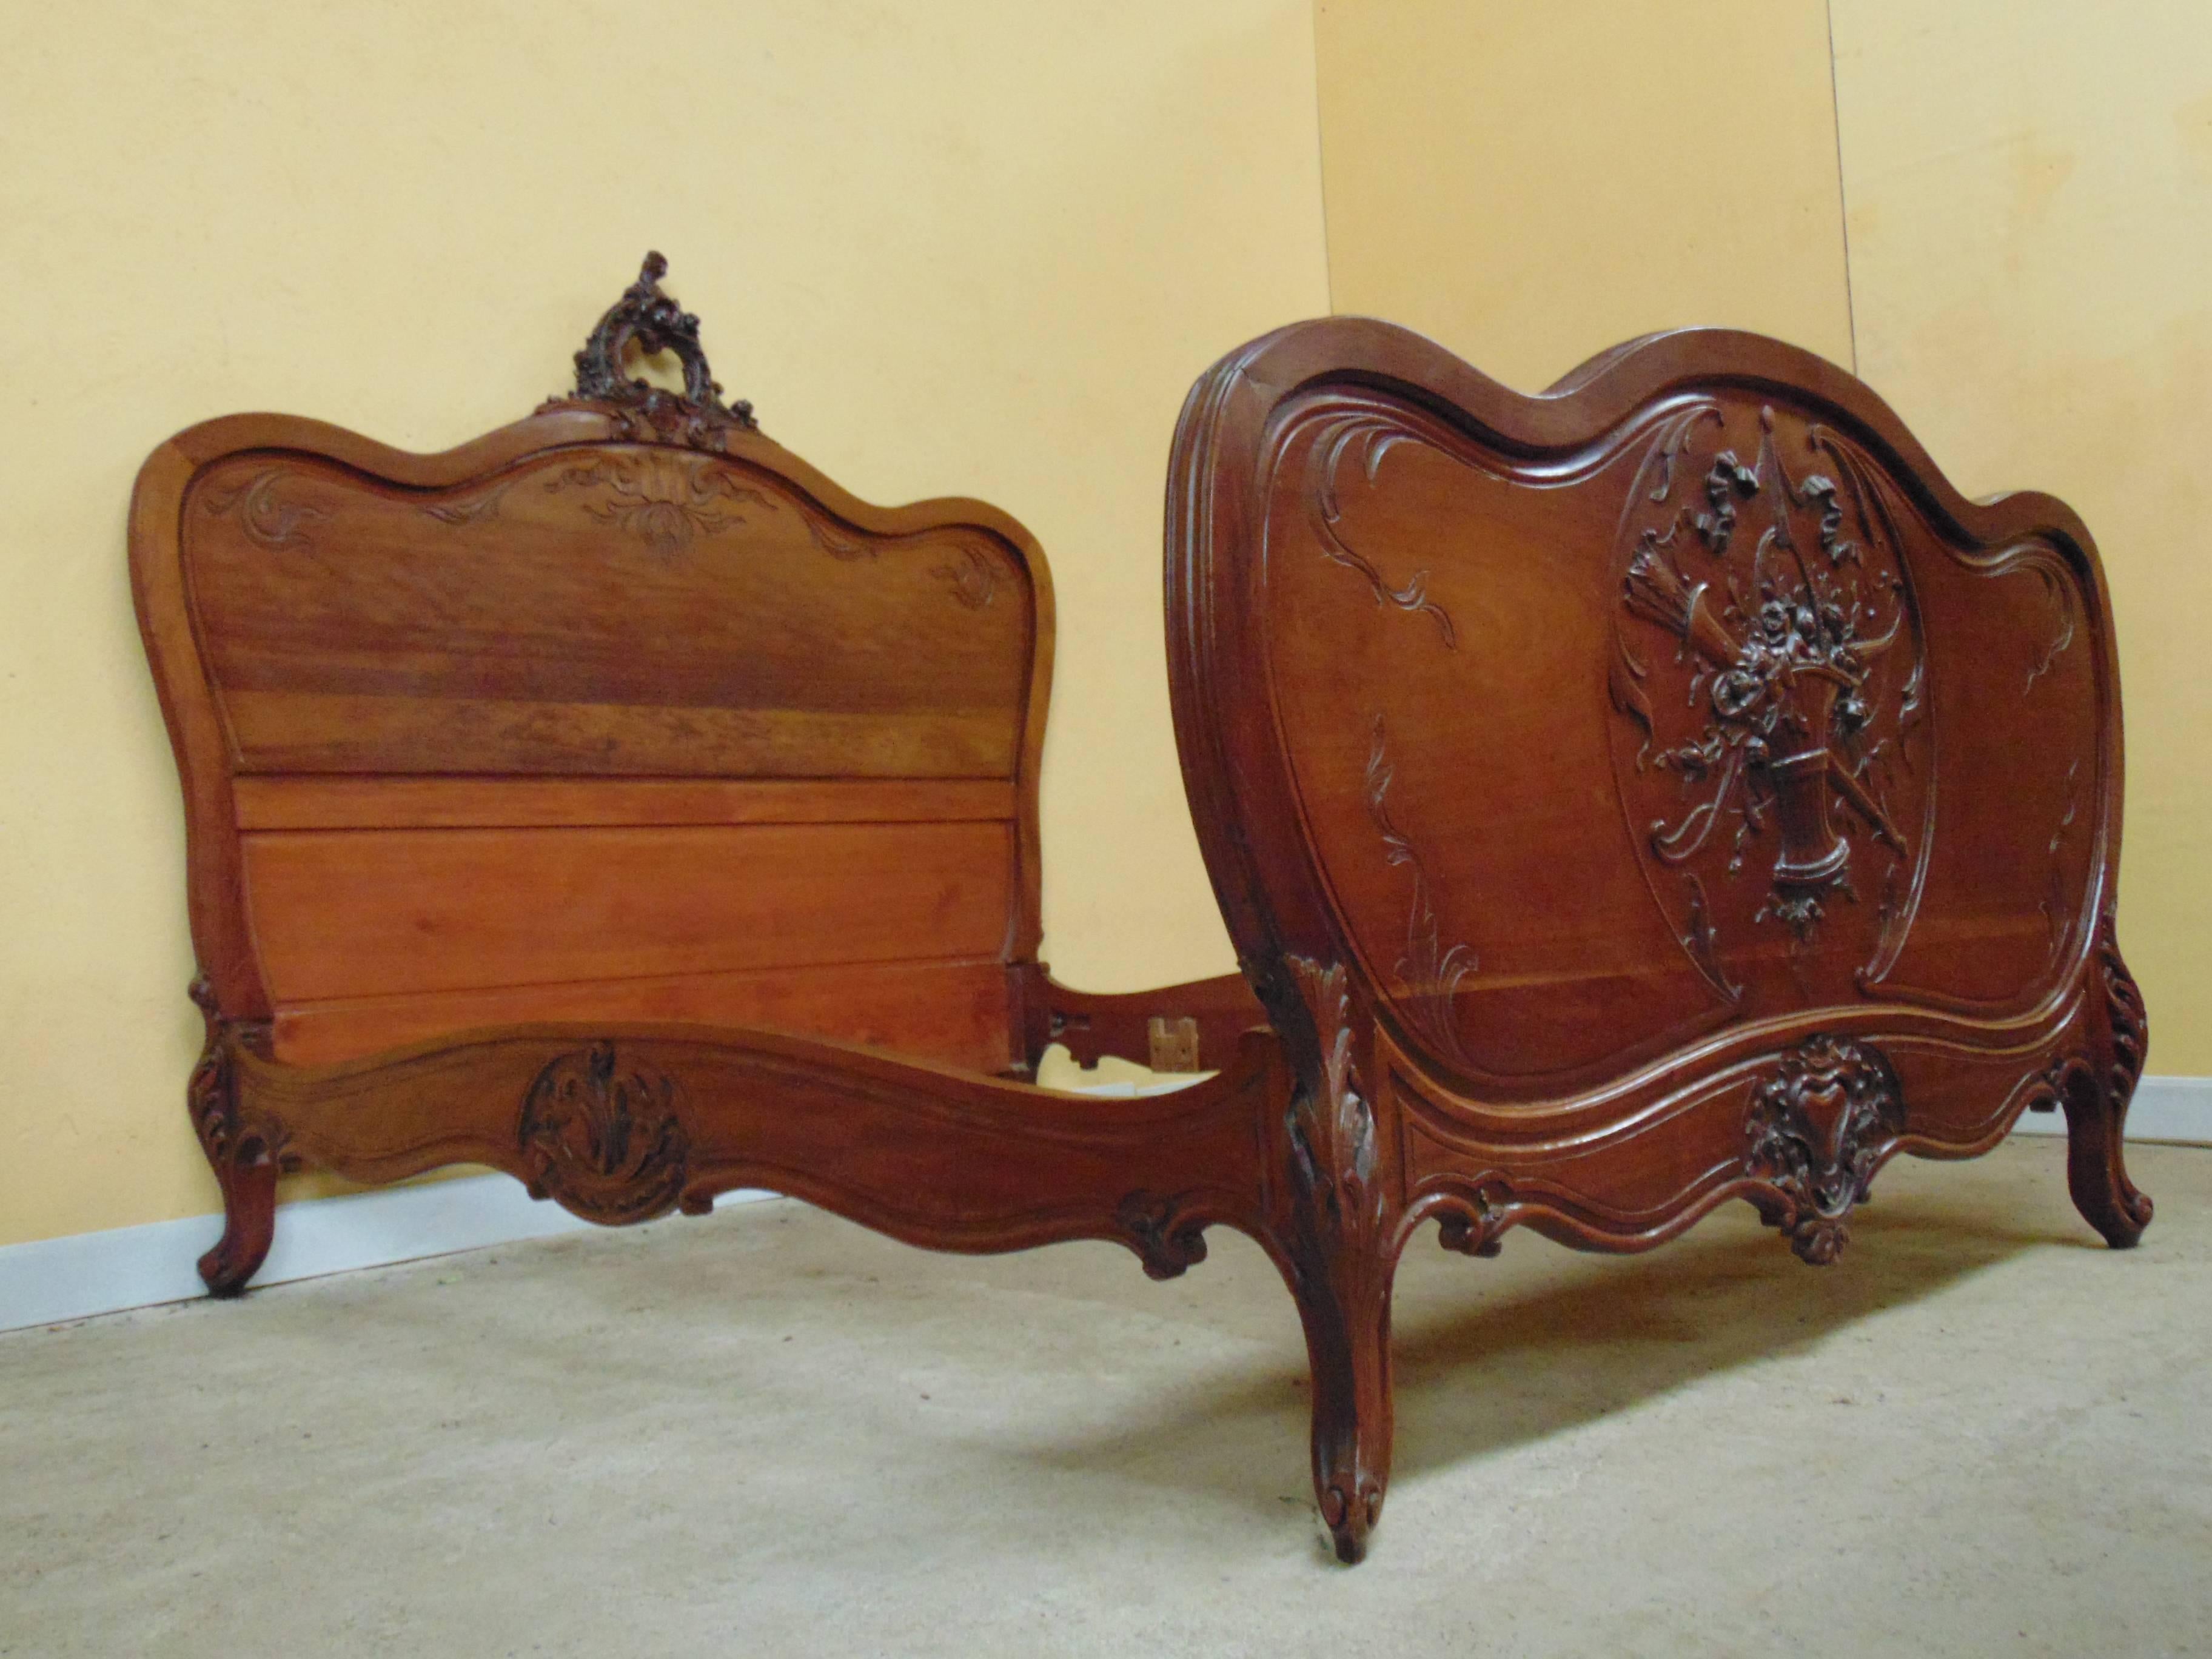 19th Century Louis XV Style Hand-Carved Walnut Bed Set, circa 1900